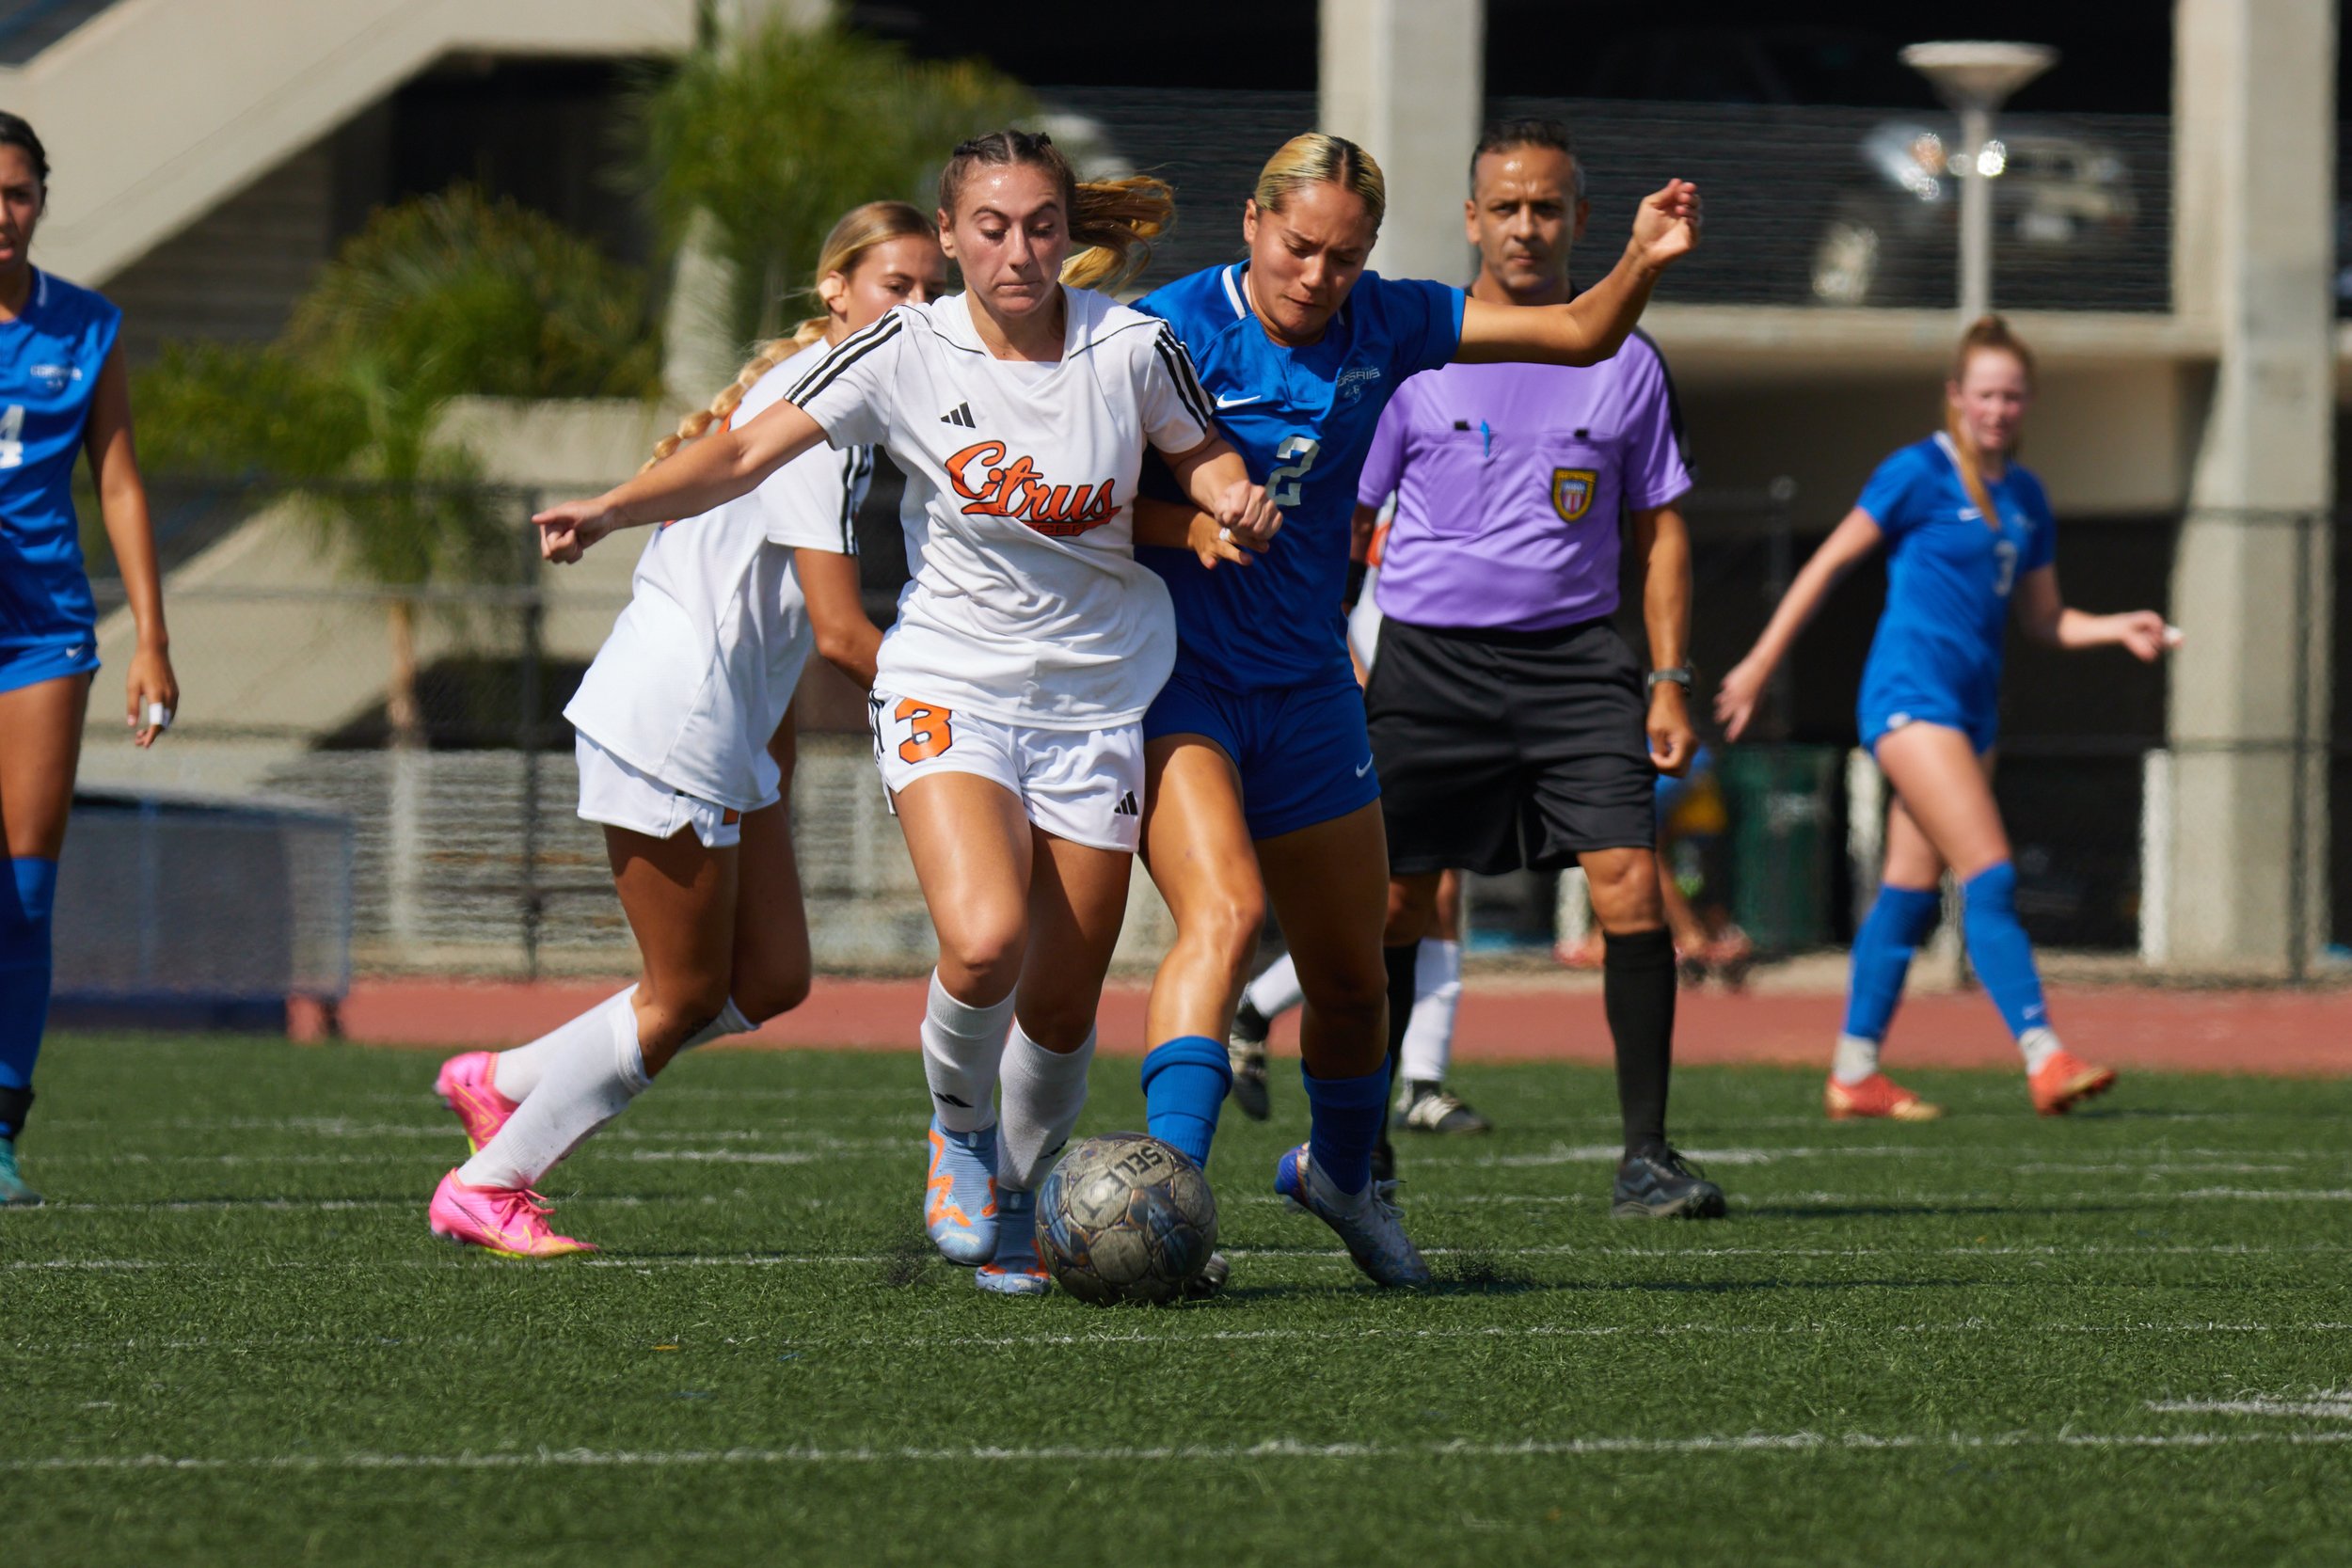  Citrus College Owls forward Jayme Beatty, left, and Santa Monica College Corsair forward Alanis Rodriguez, right, fighting for control of the ball during the women's soccer match against each other at Corsair Field, Santa Monica, Calif., on Oct 13, 